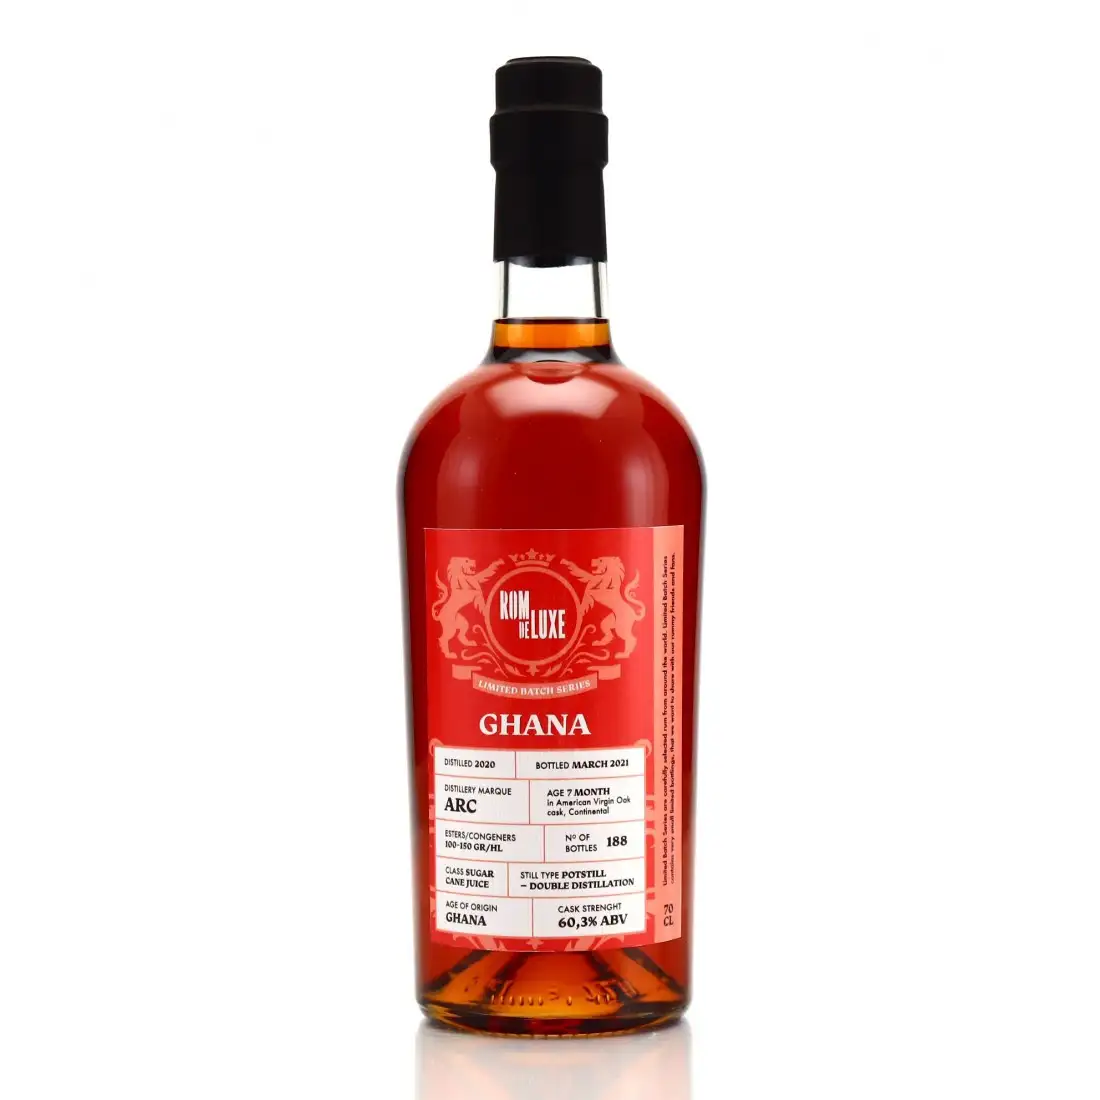 Image of the front of the bottle of the rum Limited Batch Series GHANA ARC